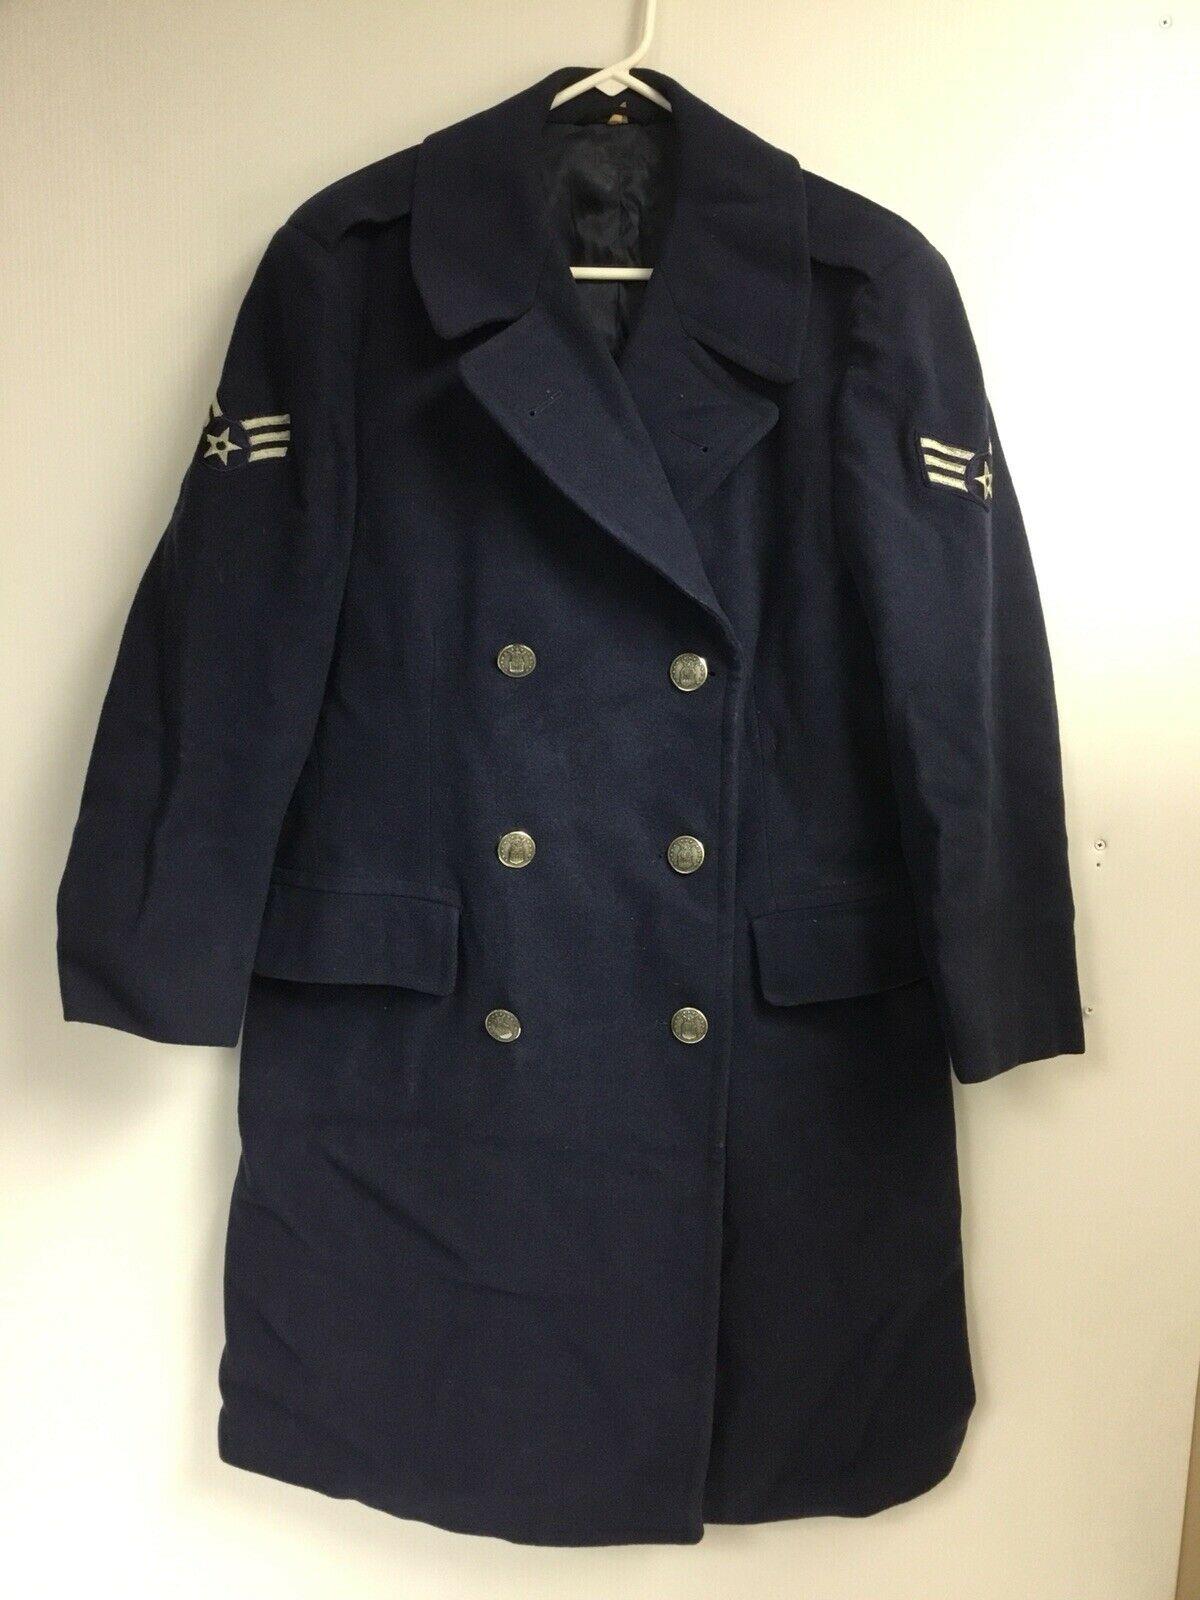 Vintage US Military Air Force Issue Wool Dress Uniform Pea Over Coat Size 39R